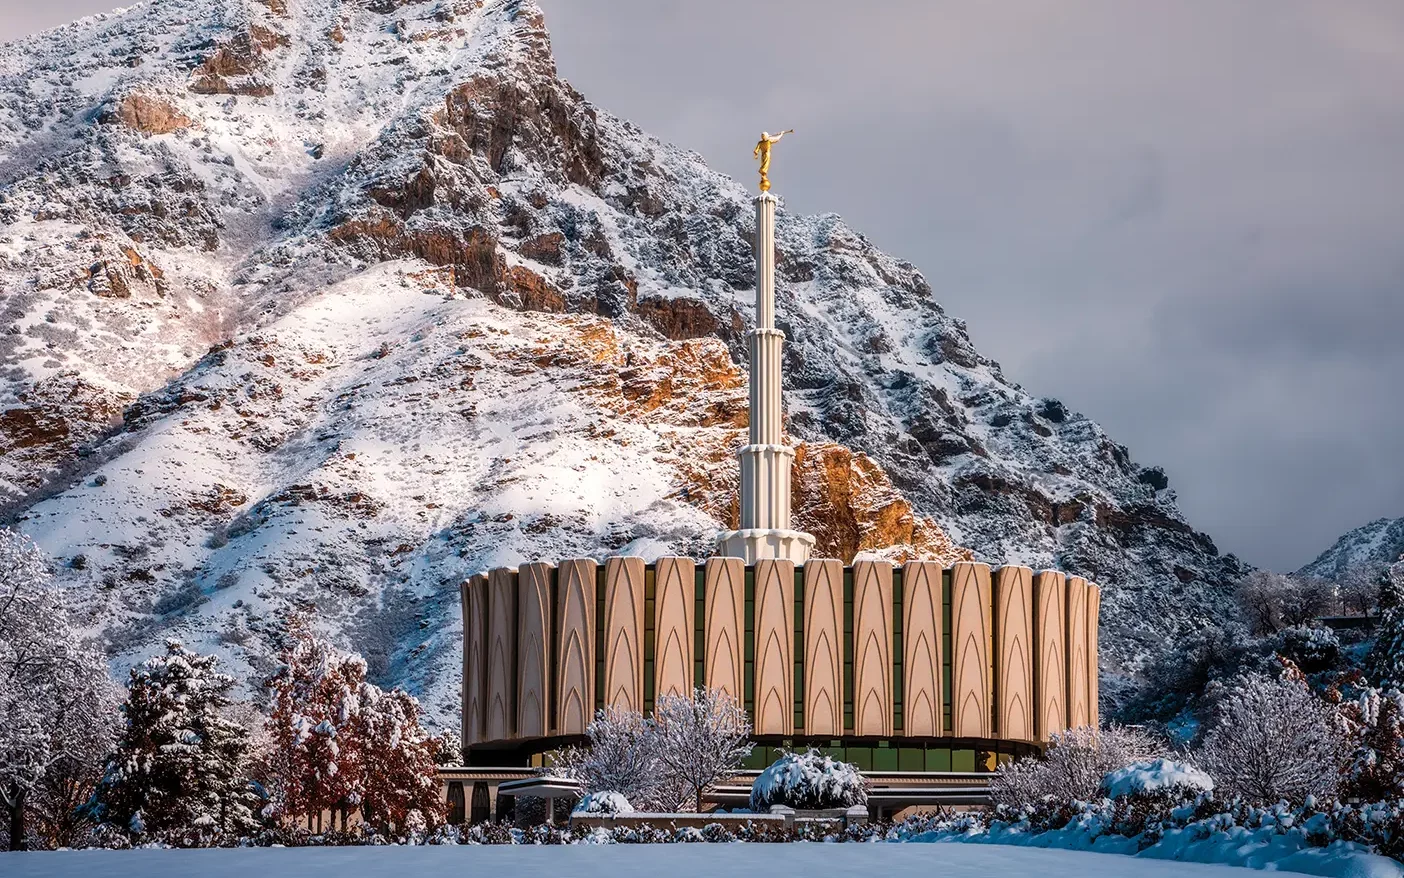 The Provo temple with snowy mountains in the background